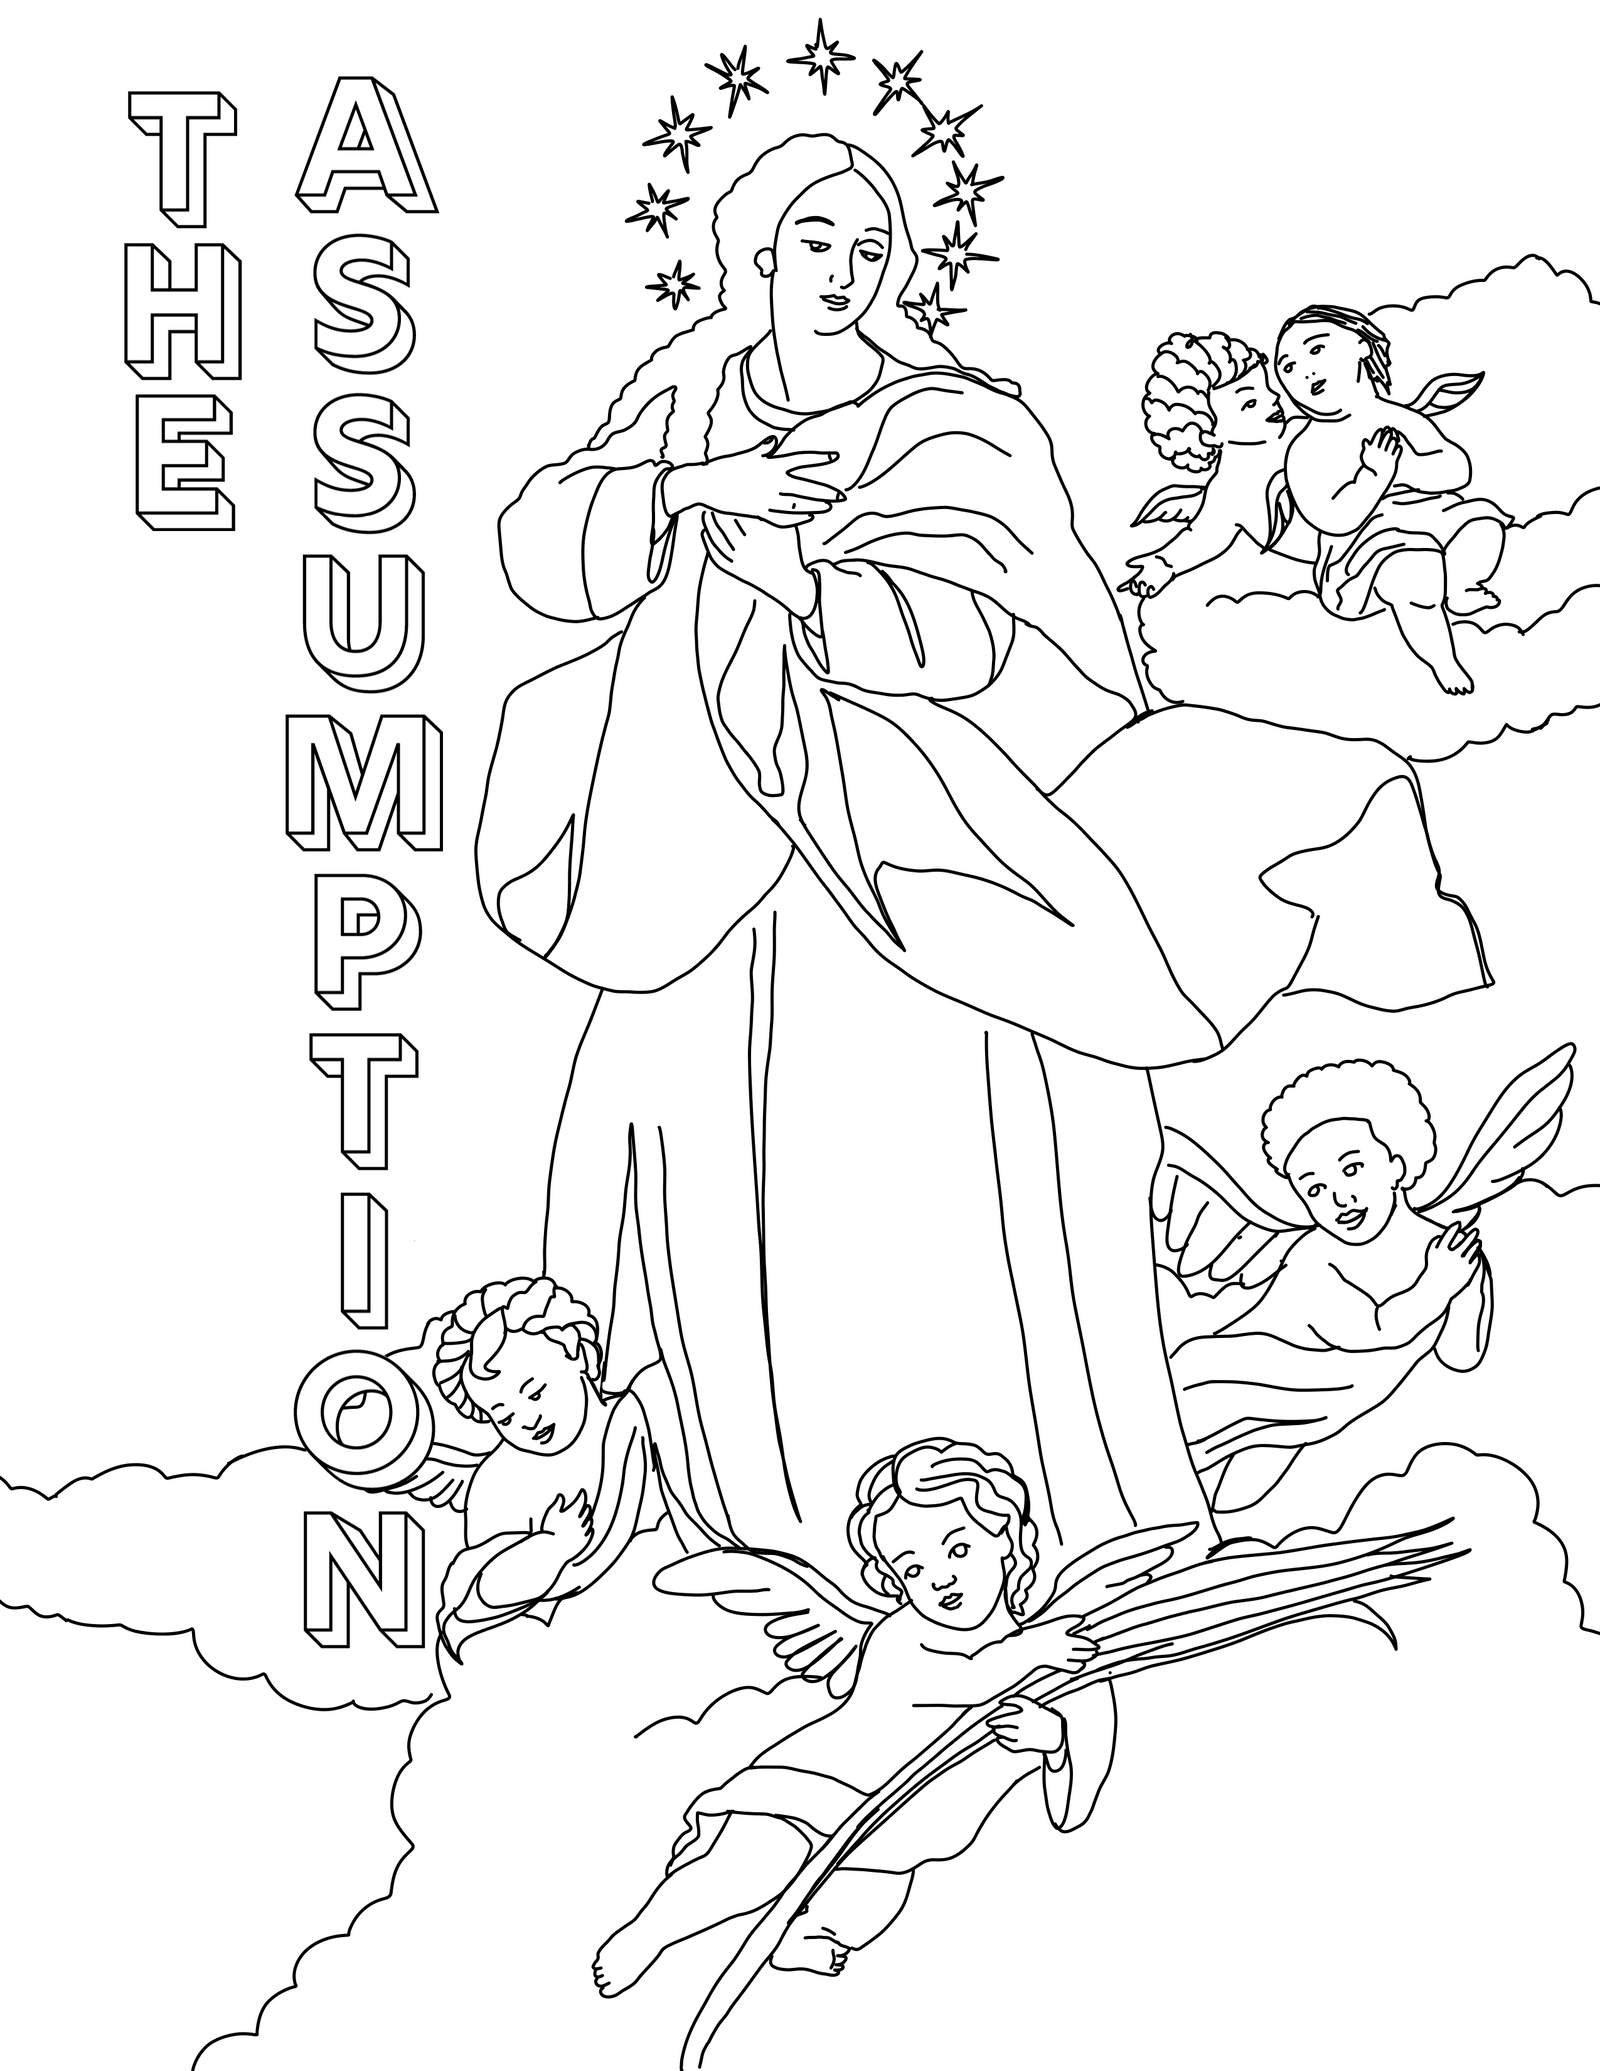 The Assumption - Catholic Coloring Page